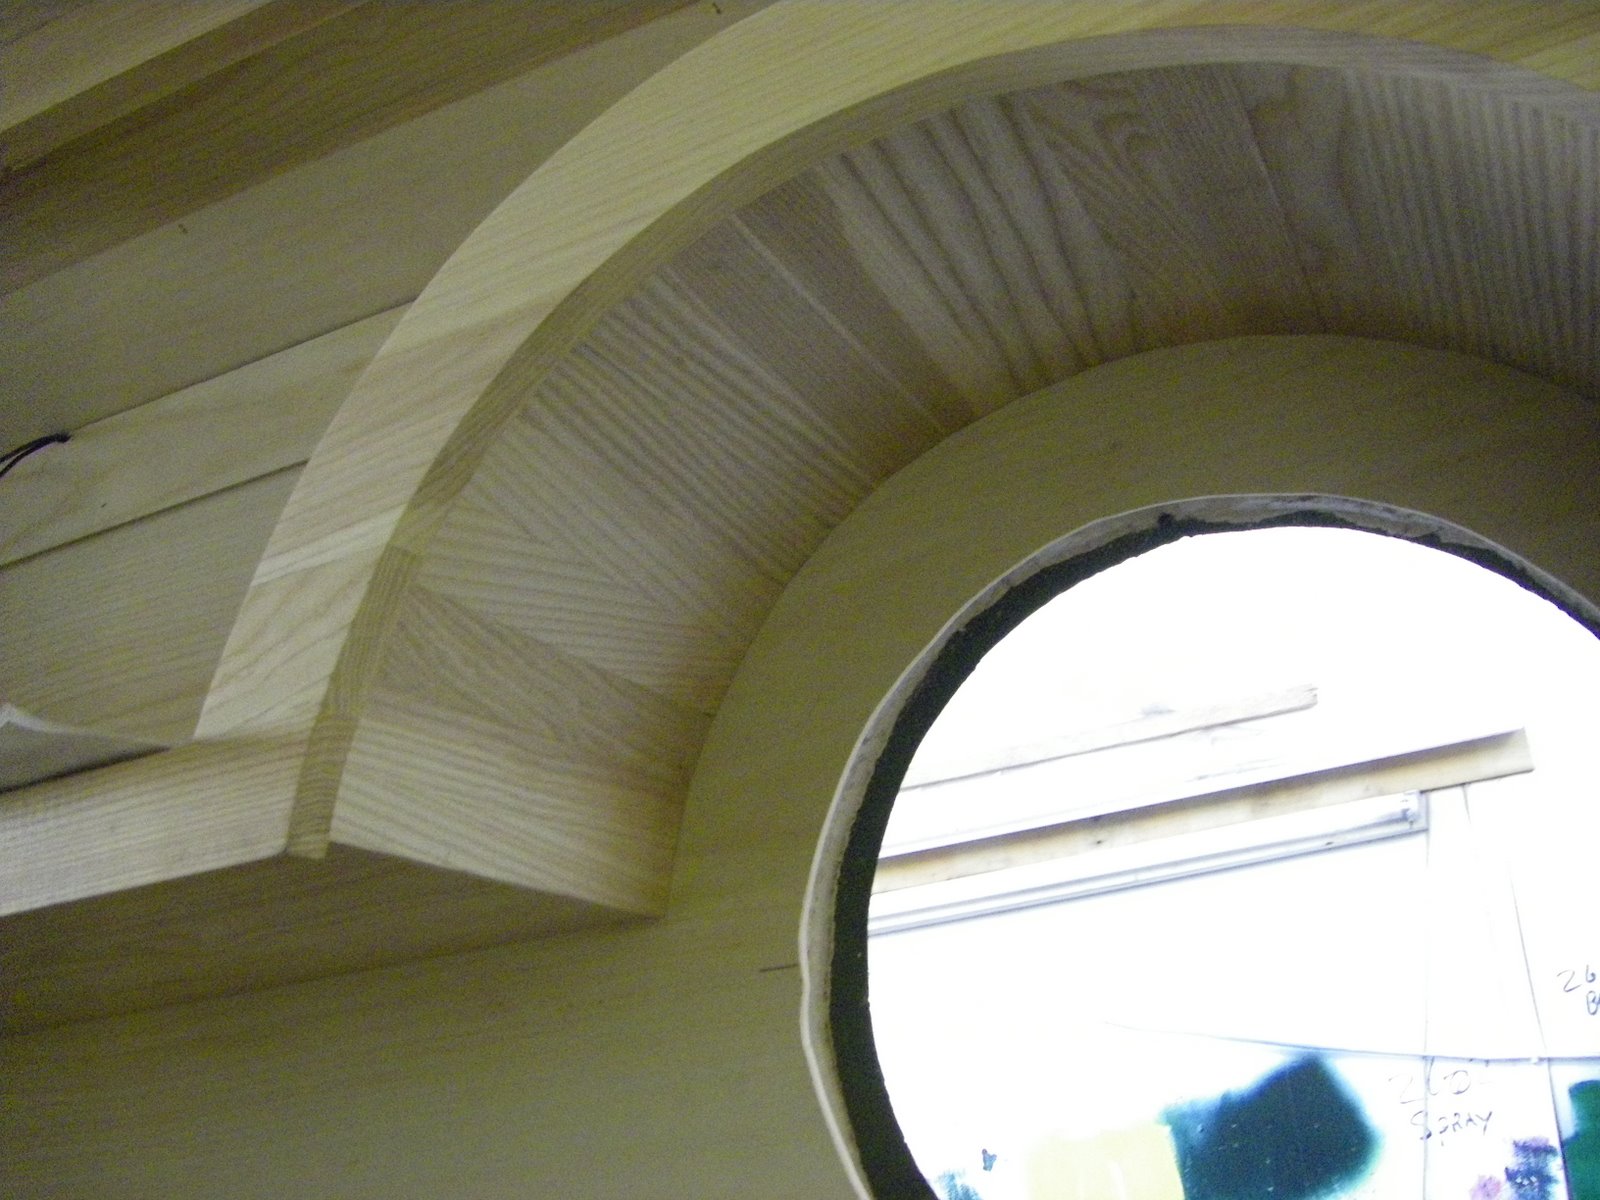 [Porthole+arch+in+cabin.JPG]